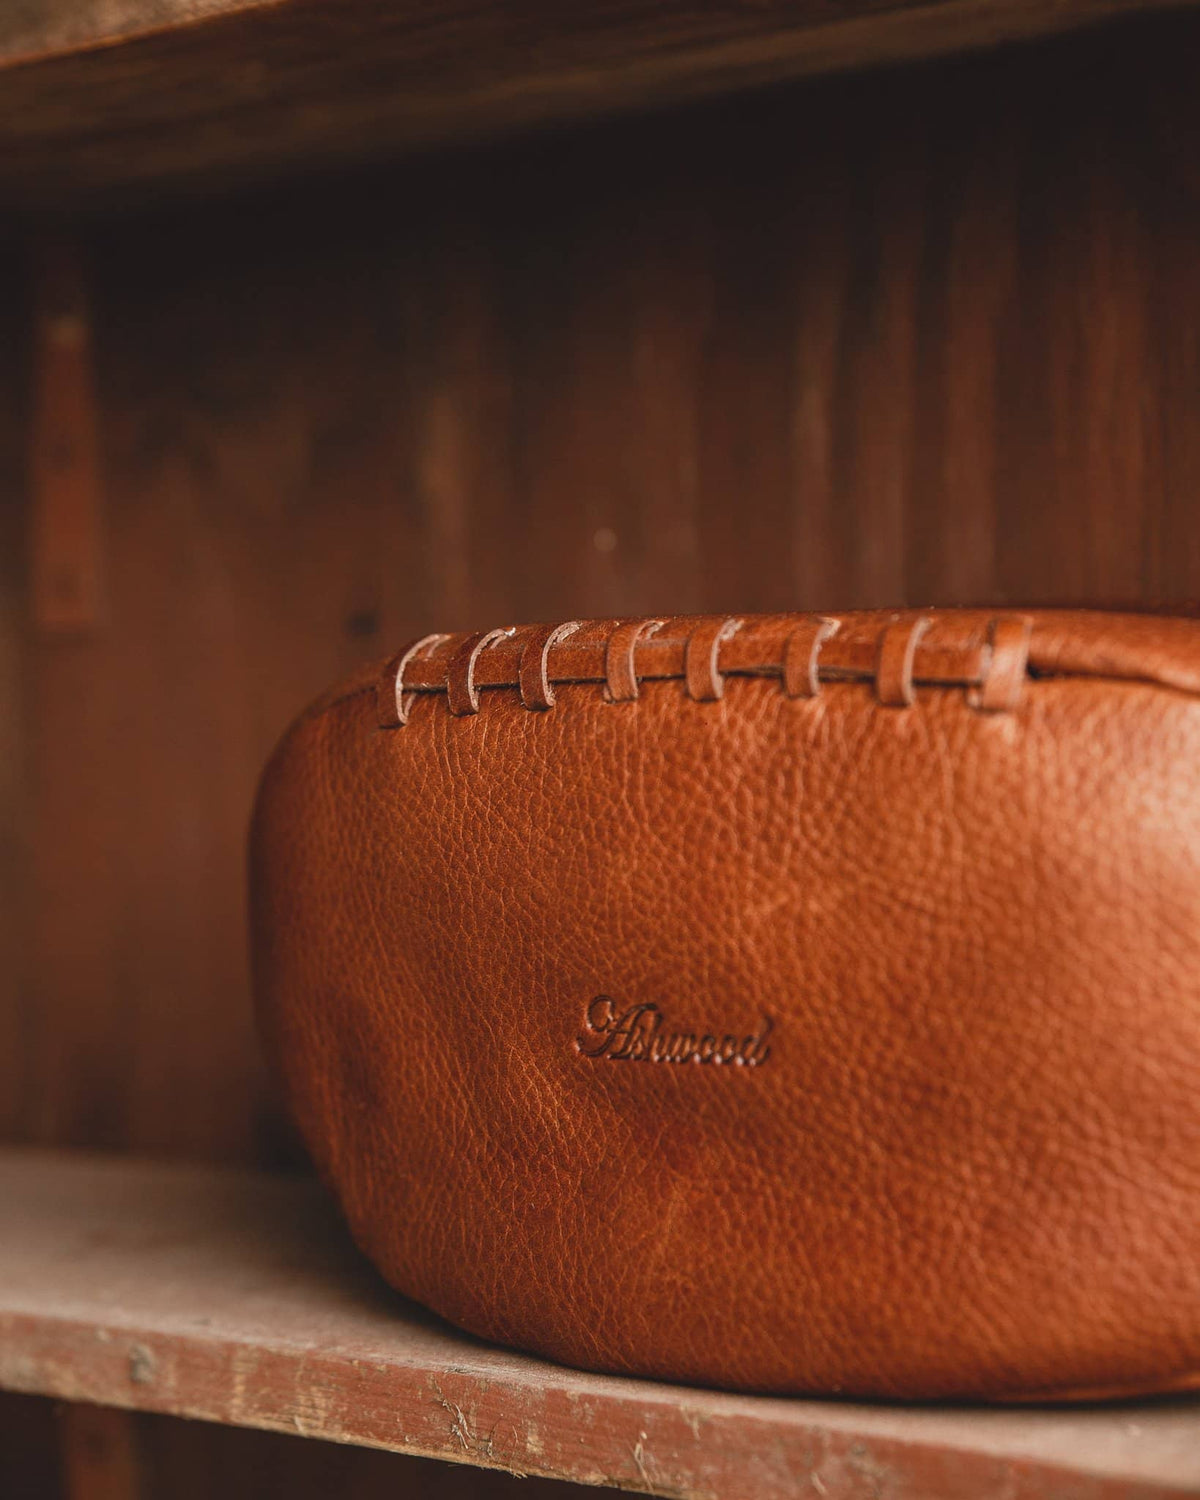 Leather Washbag Rugby Ball Style - Best Mens Gift, Chat